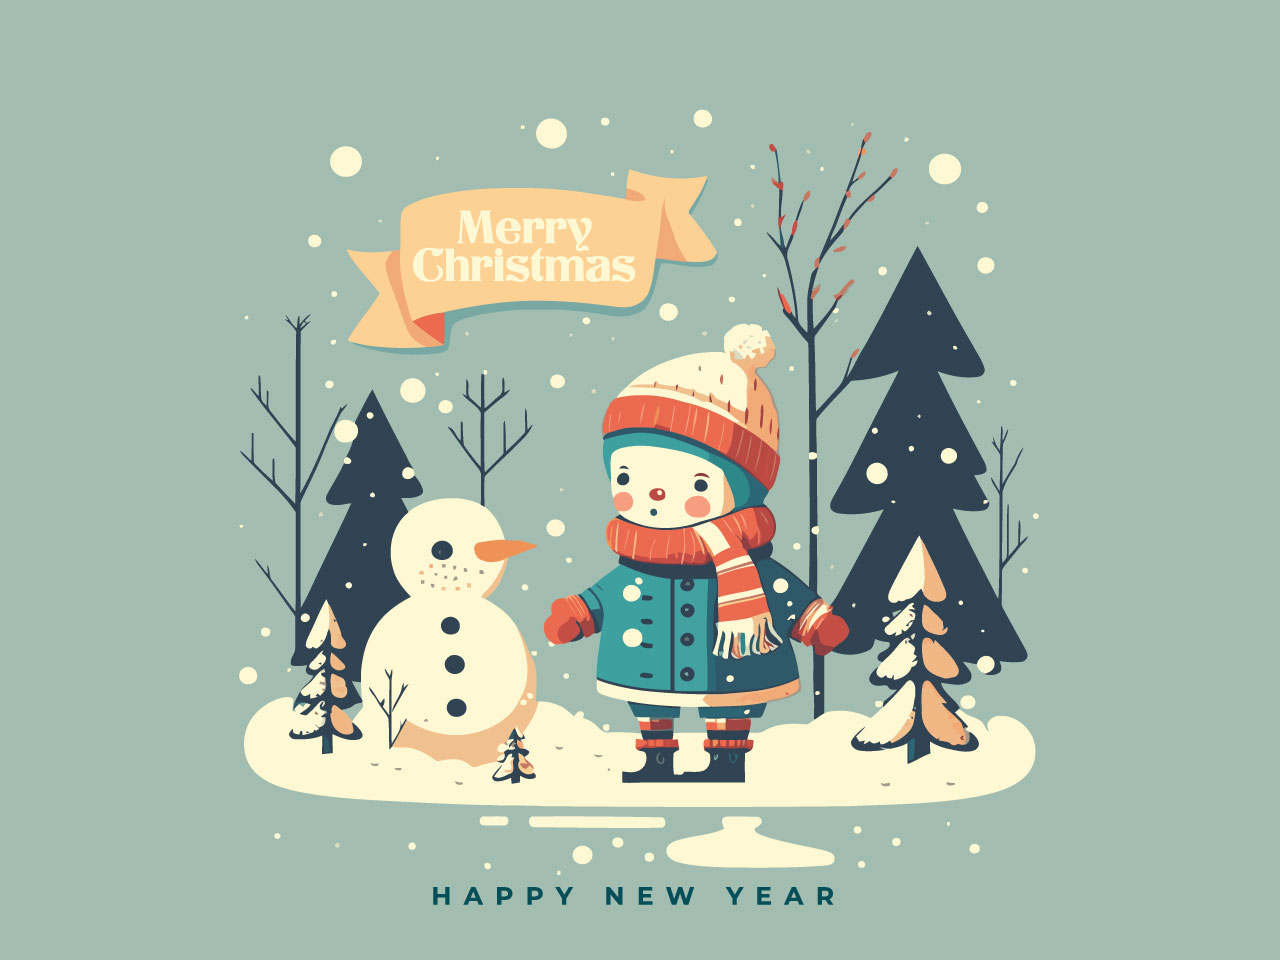 Merry christmas happy new year greeting clipart image